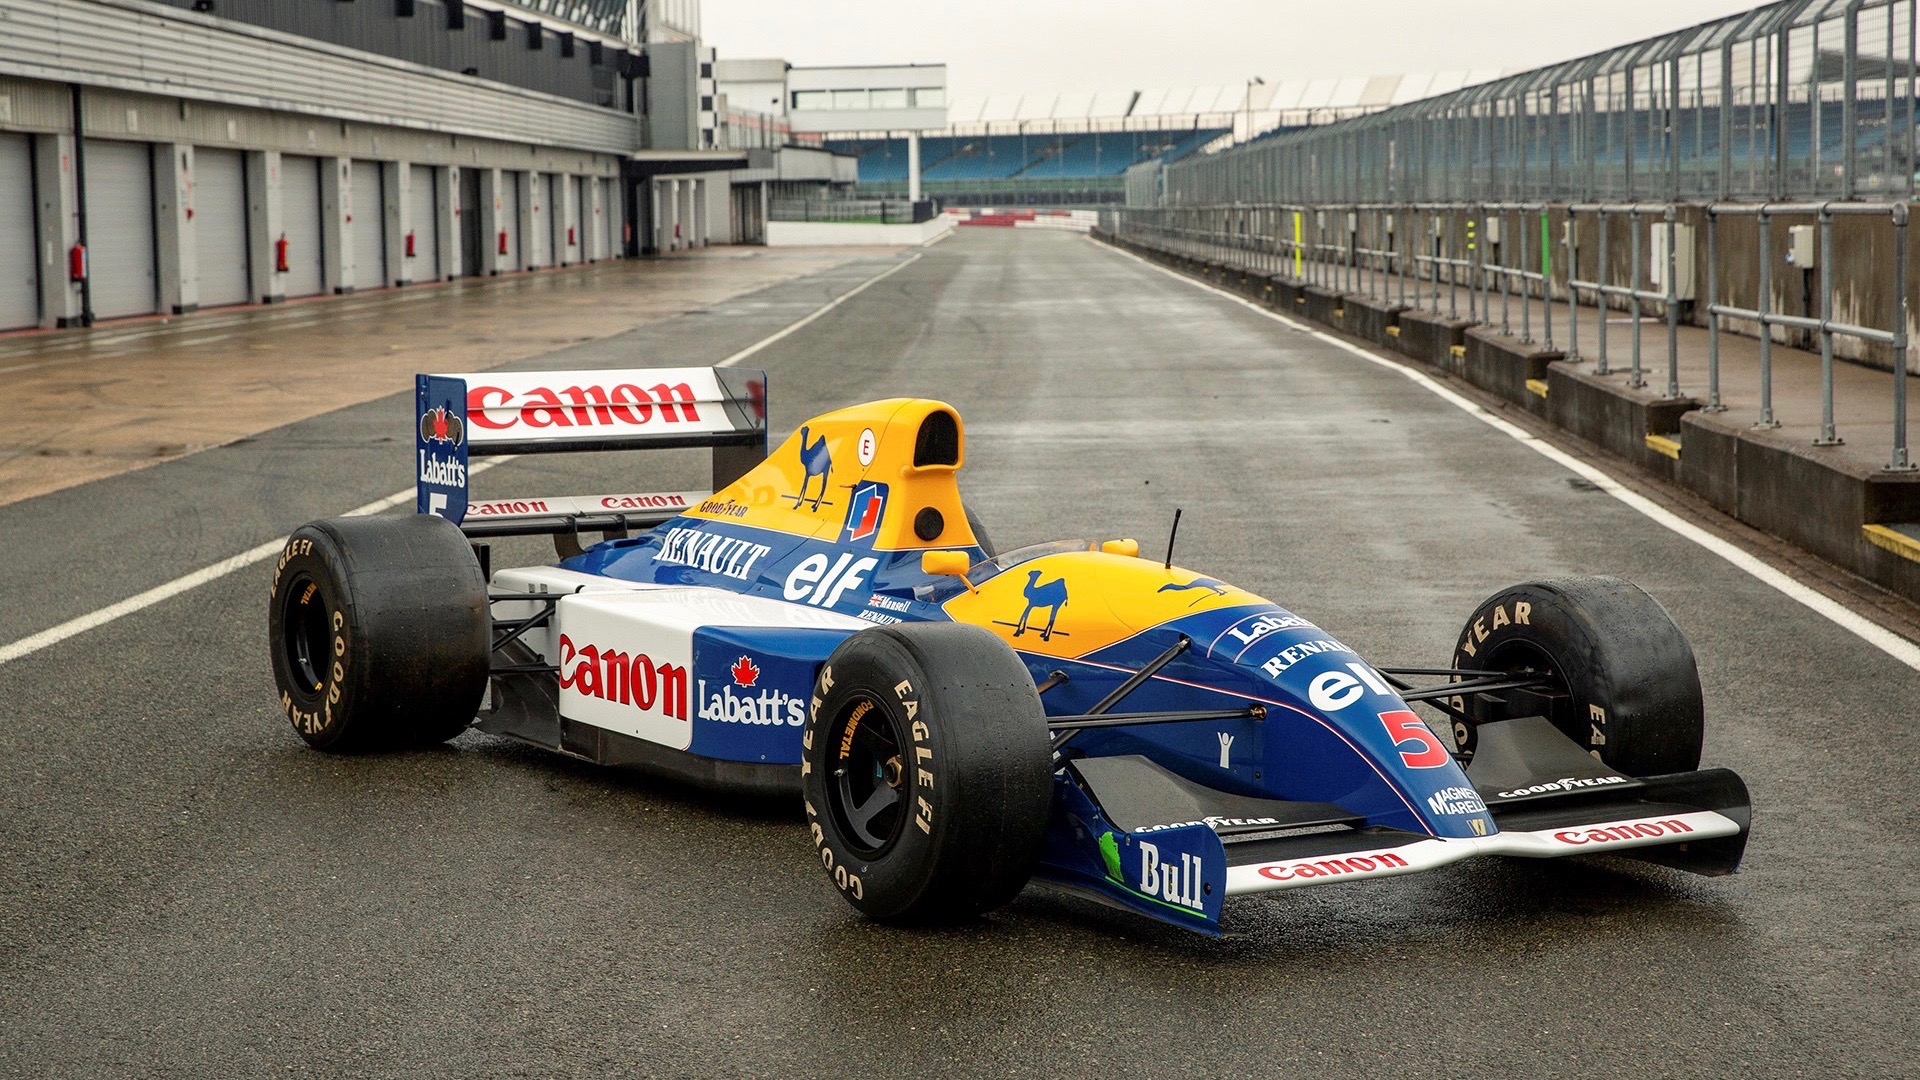 1650566482 Nigel Mansell collection heading to auction including two F1 cars